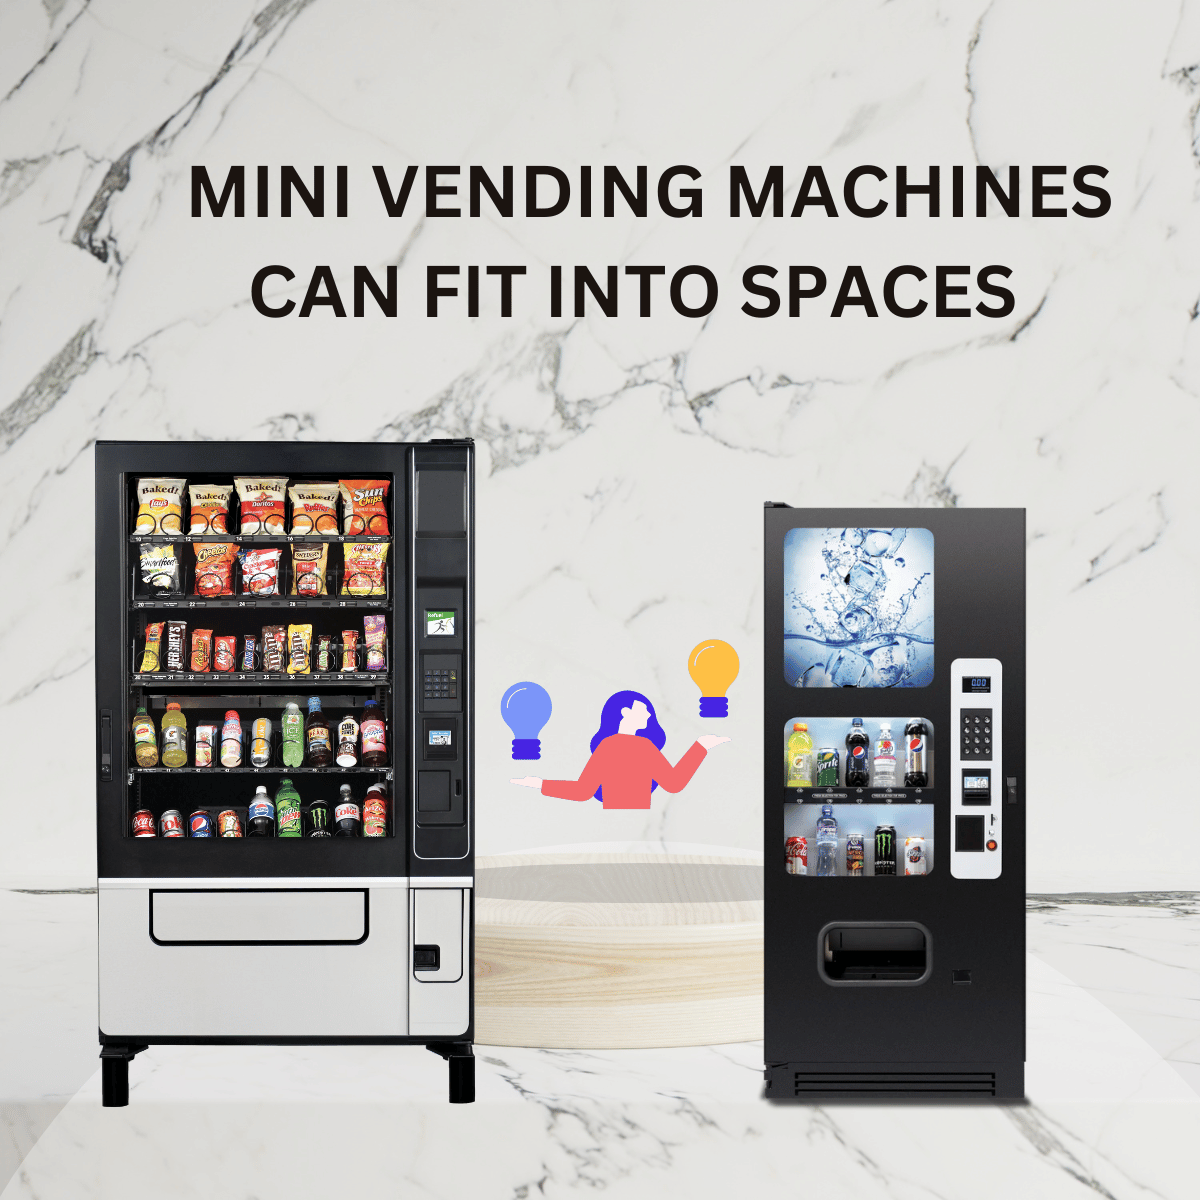 THE CONVENIENCE OF SMALL TABLETOP VENDING MACHINES